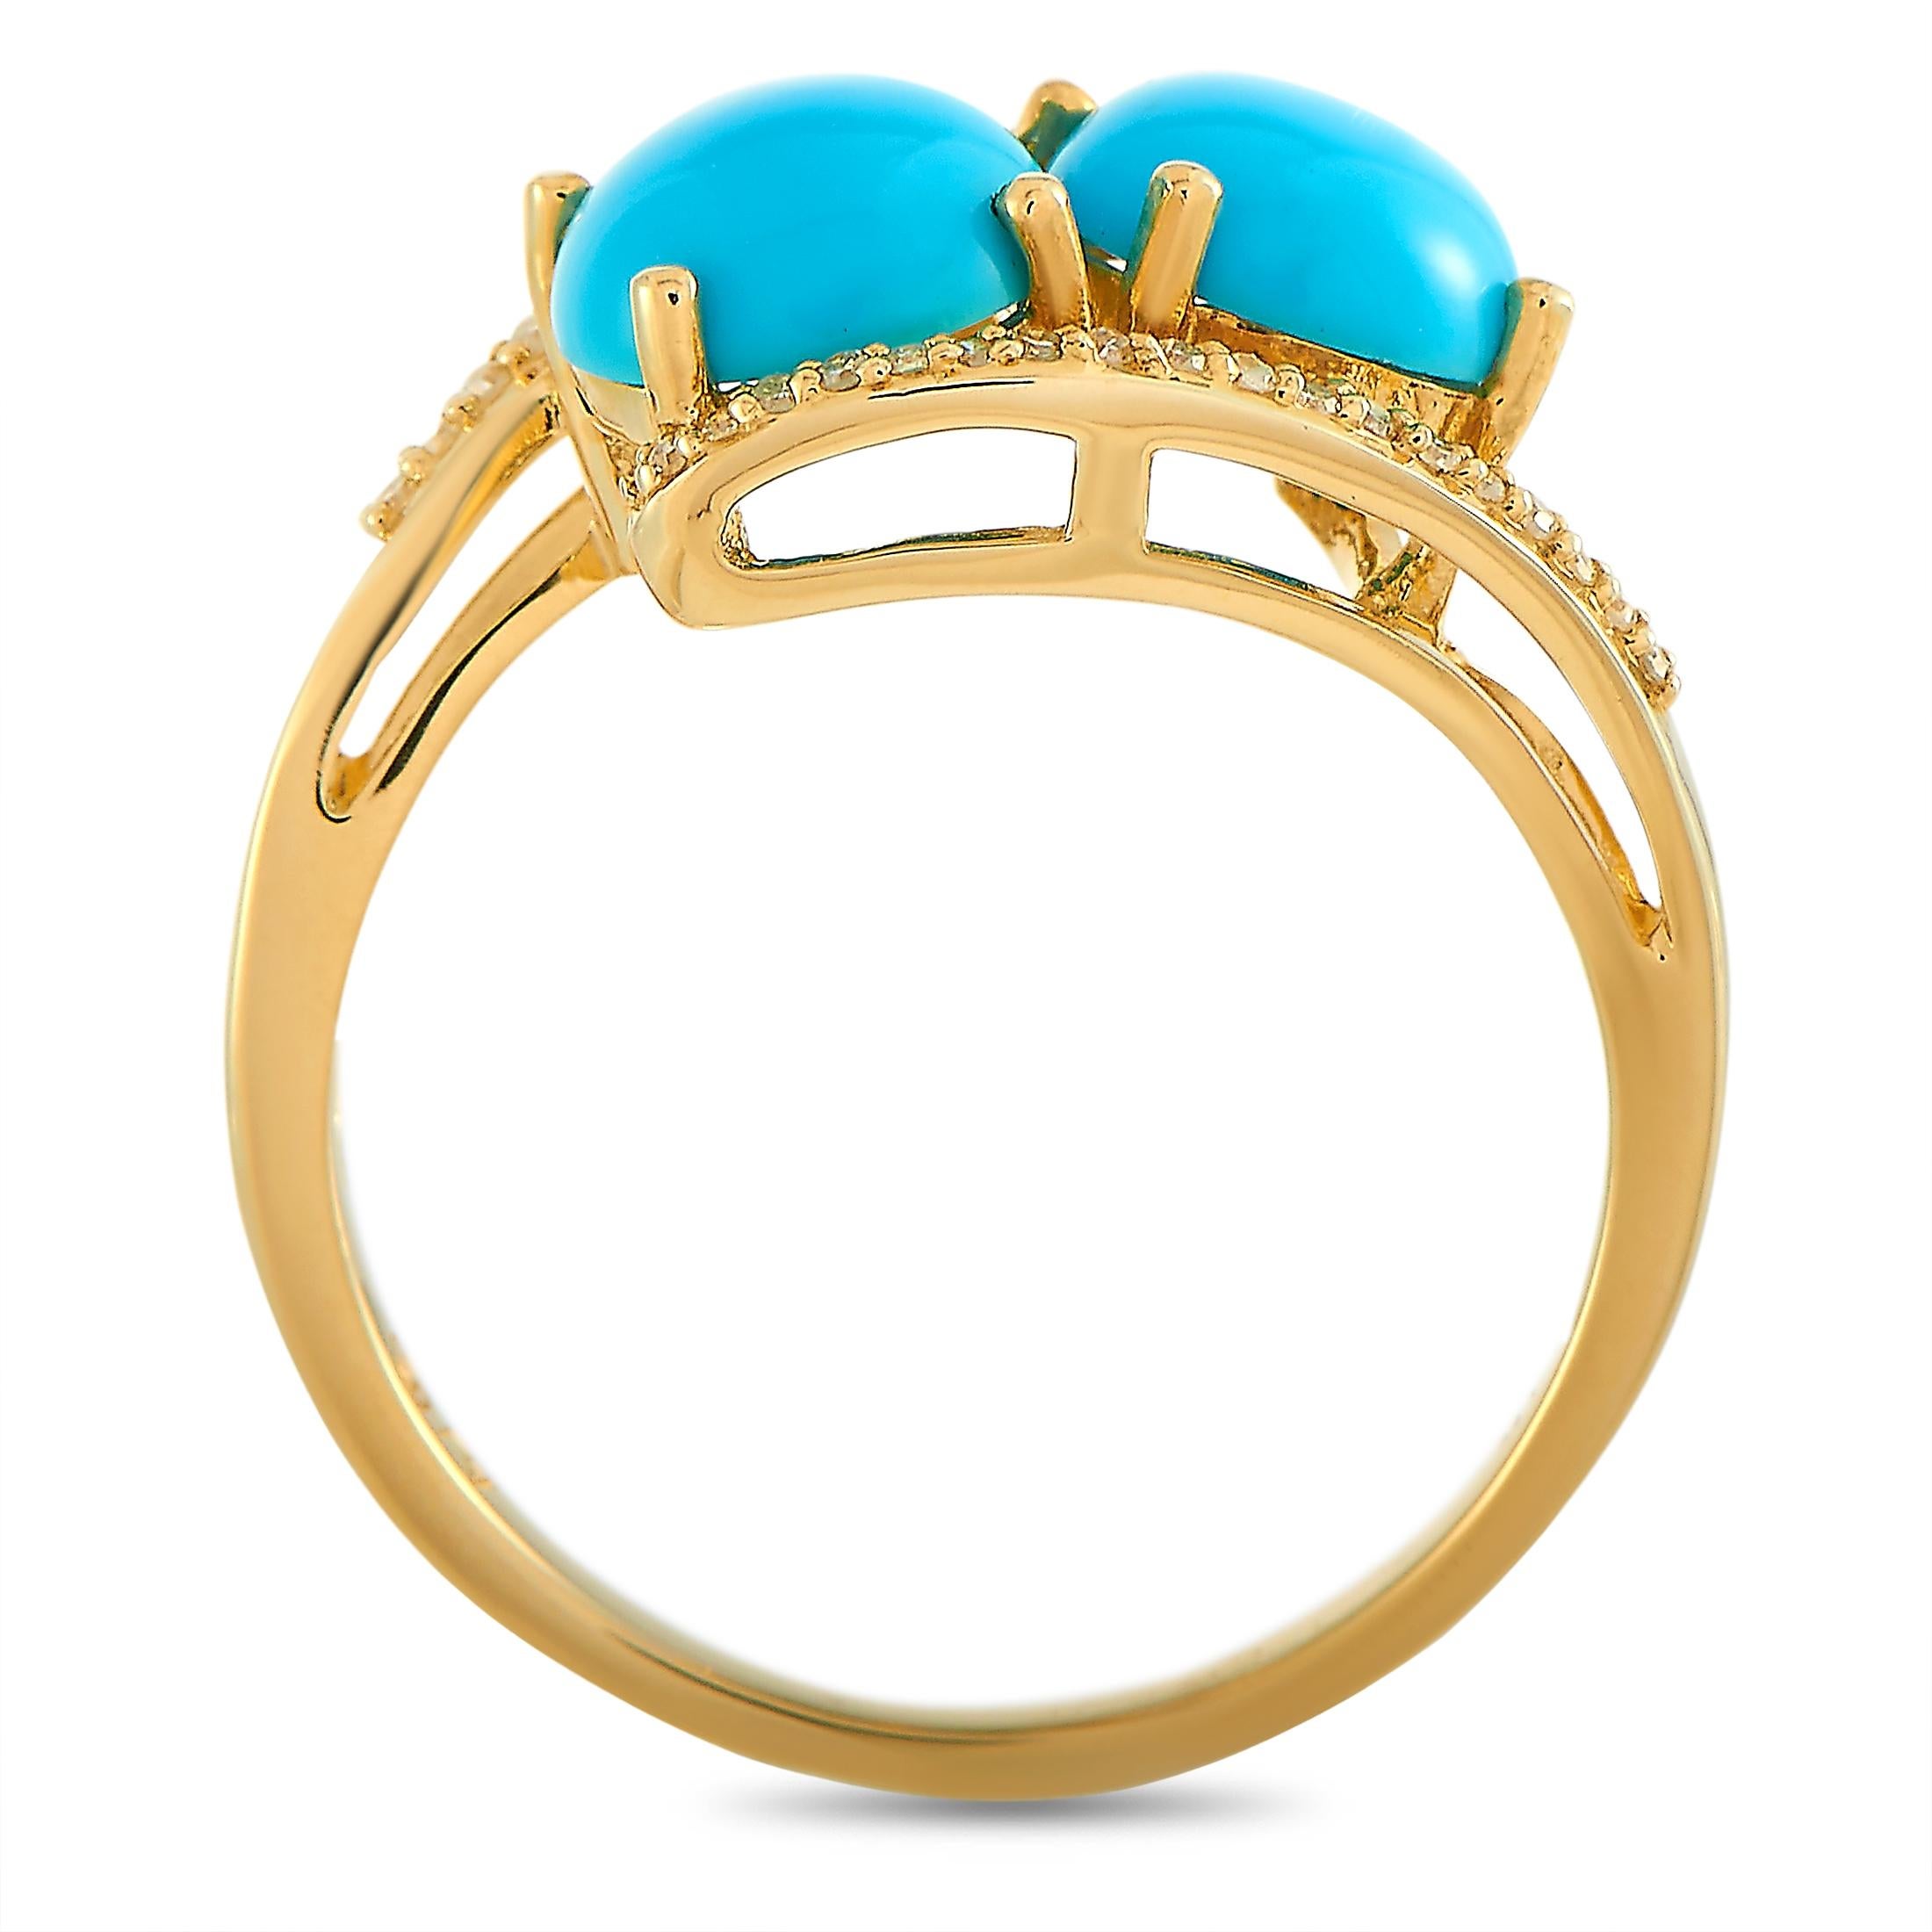 This LB Exclusive ring is crafted from 14K yellow gold and weighs 3.1 grams, boasting band thickness of 2 mm and top height of 7 mm, while top dimensions measure 11 by 15 mm. The ring is set with turquoises and a total of 0.10 carats of diamonds.
